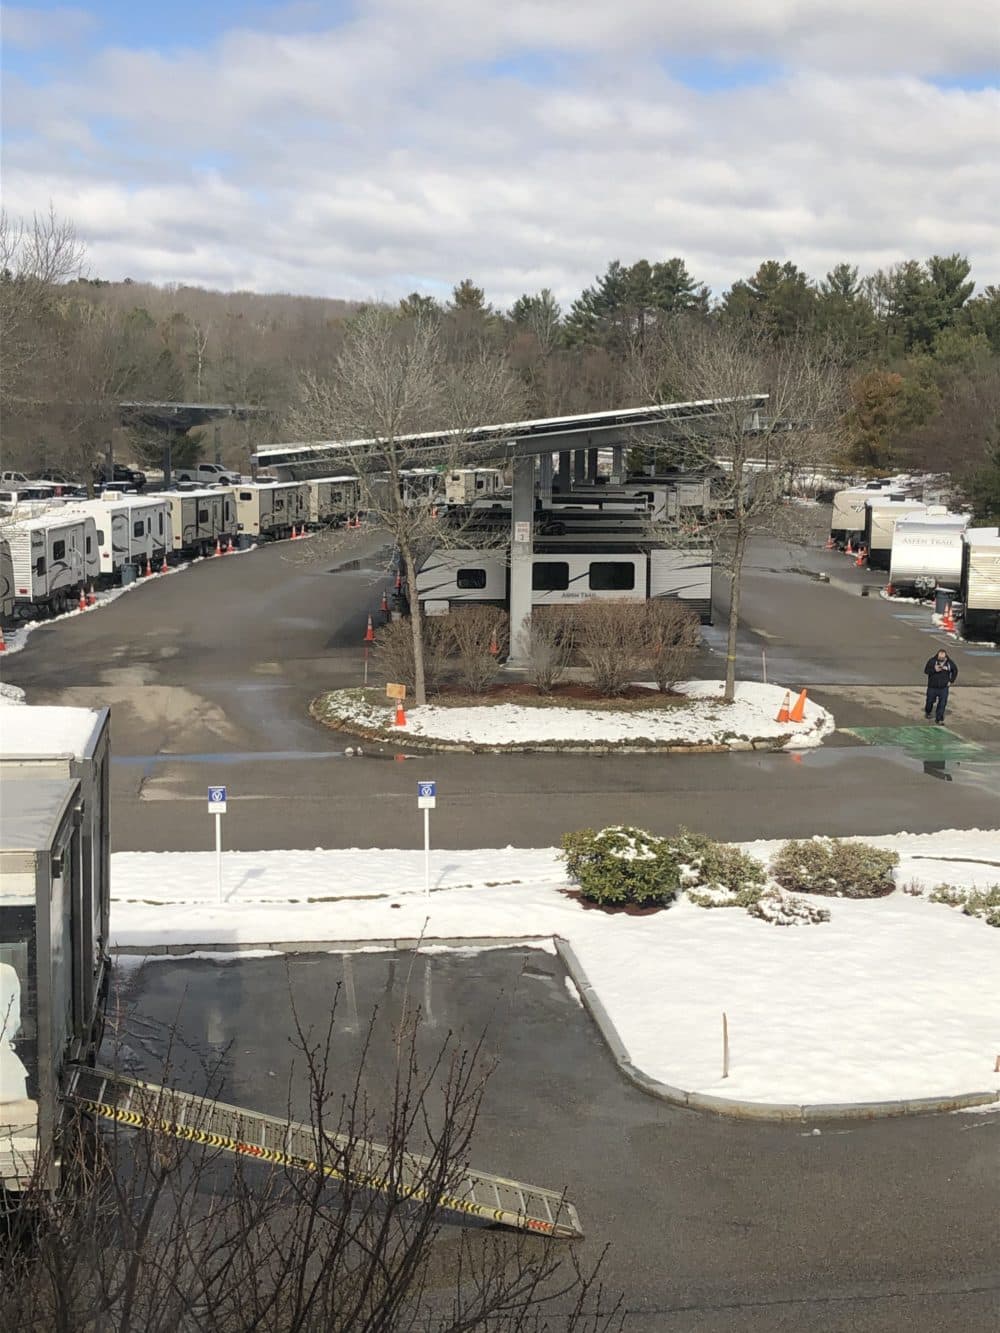 About a hundred workers are sequestered at National Grid's temporary command center during the pandemic. Courtesy of National Grid